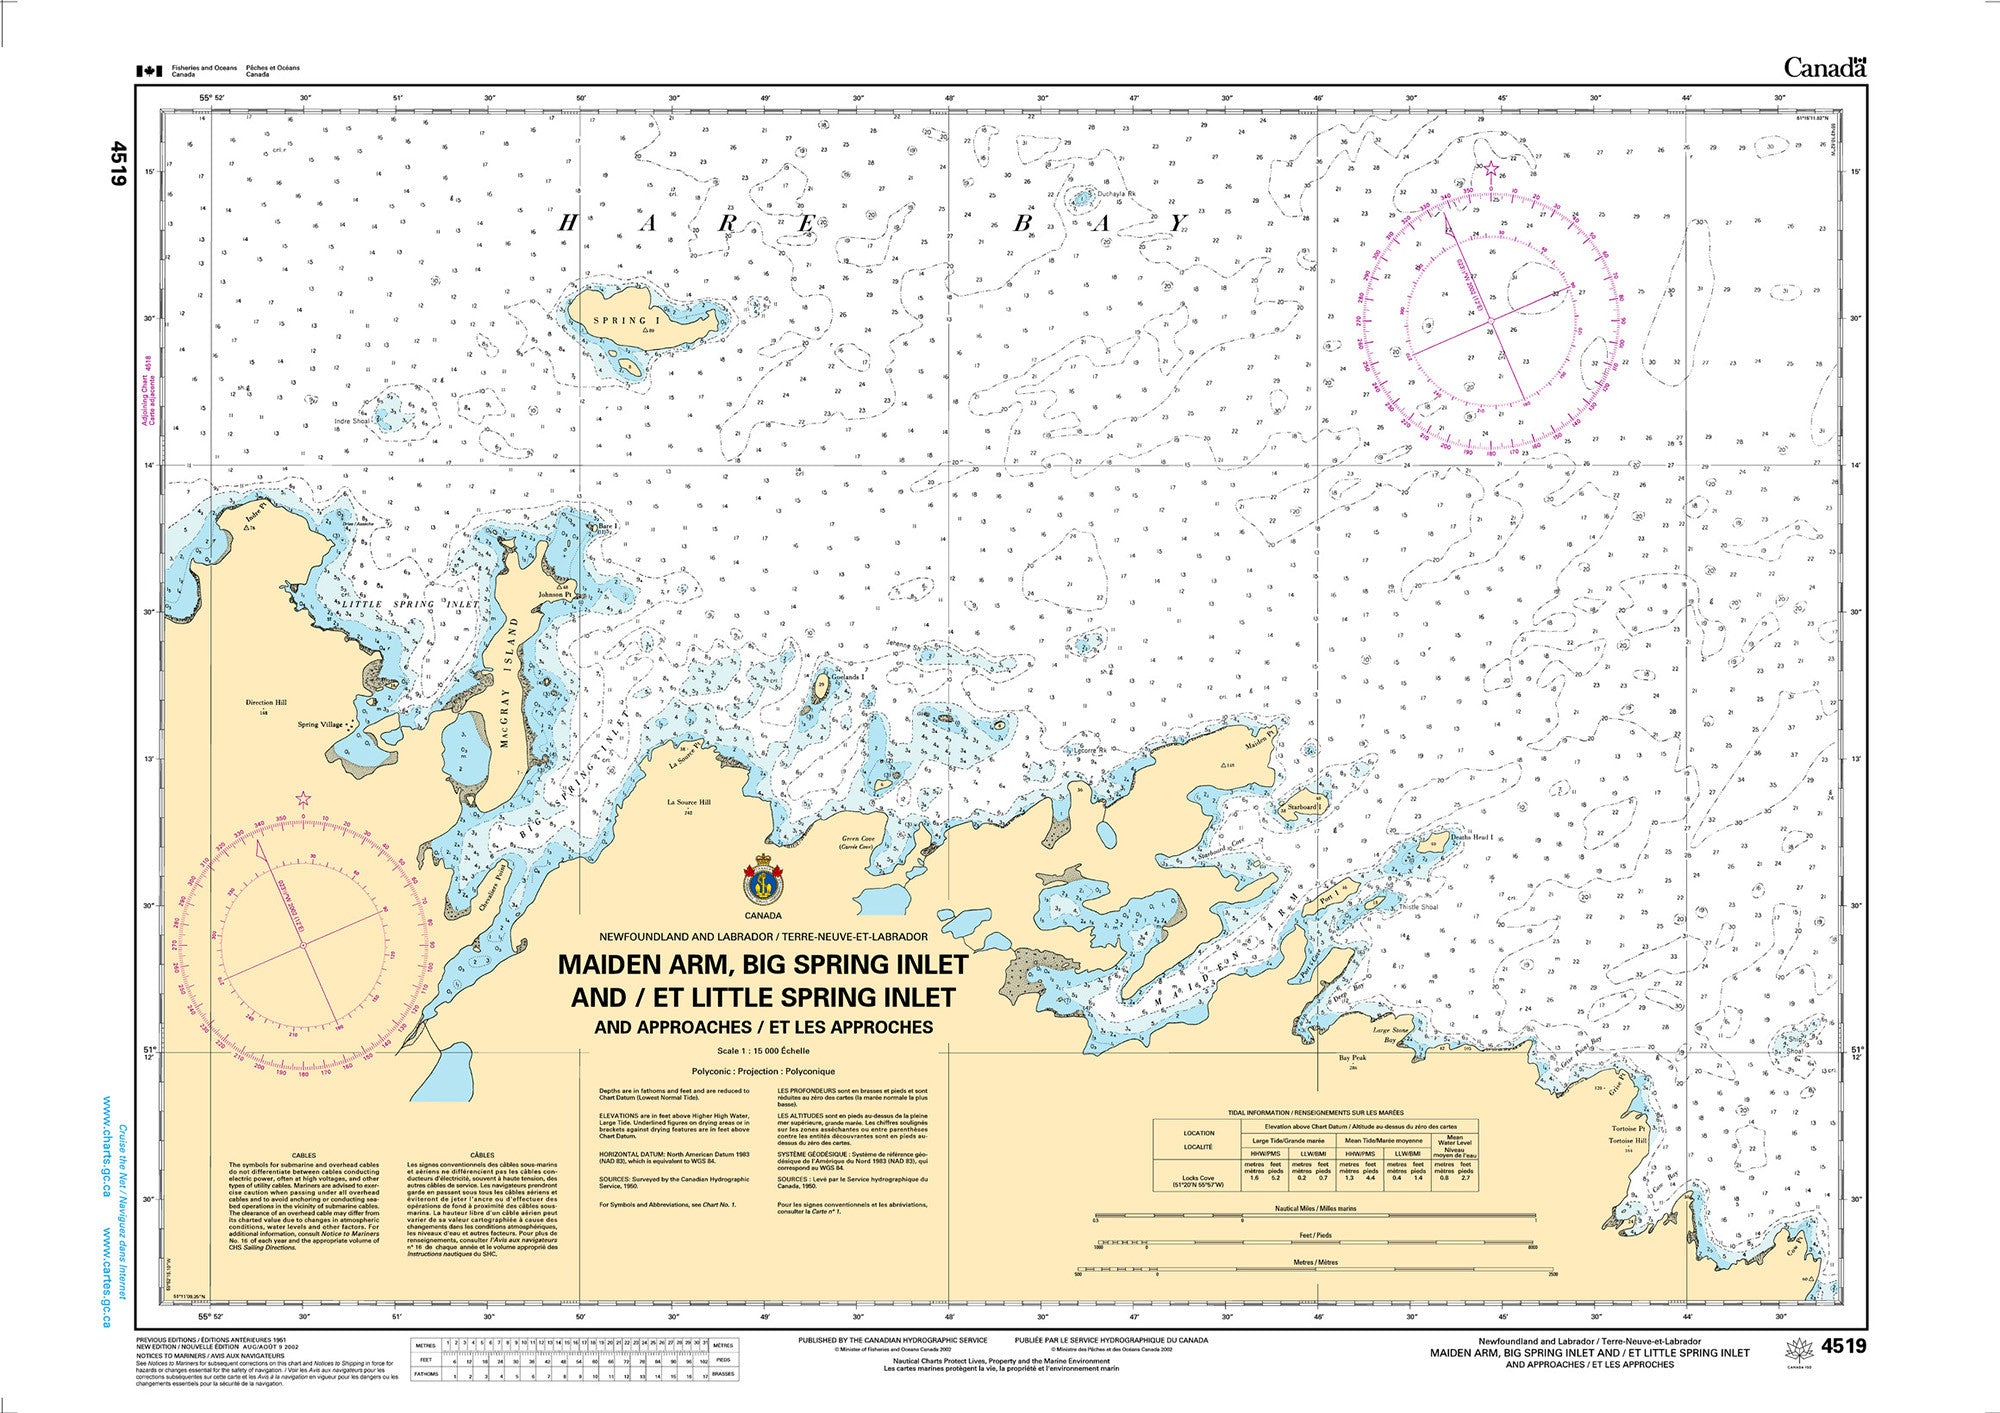 Canadian Hydrographic Service Nautical Chart CHS4519: Maiden Arm, Big Spring Inlet and/et Little Spring Inlet (and approaches/et les approches)